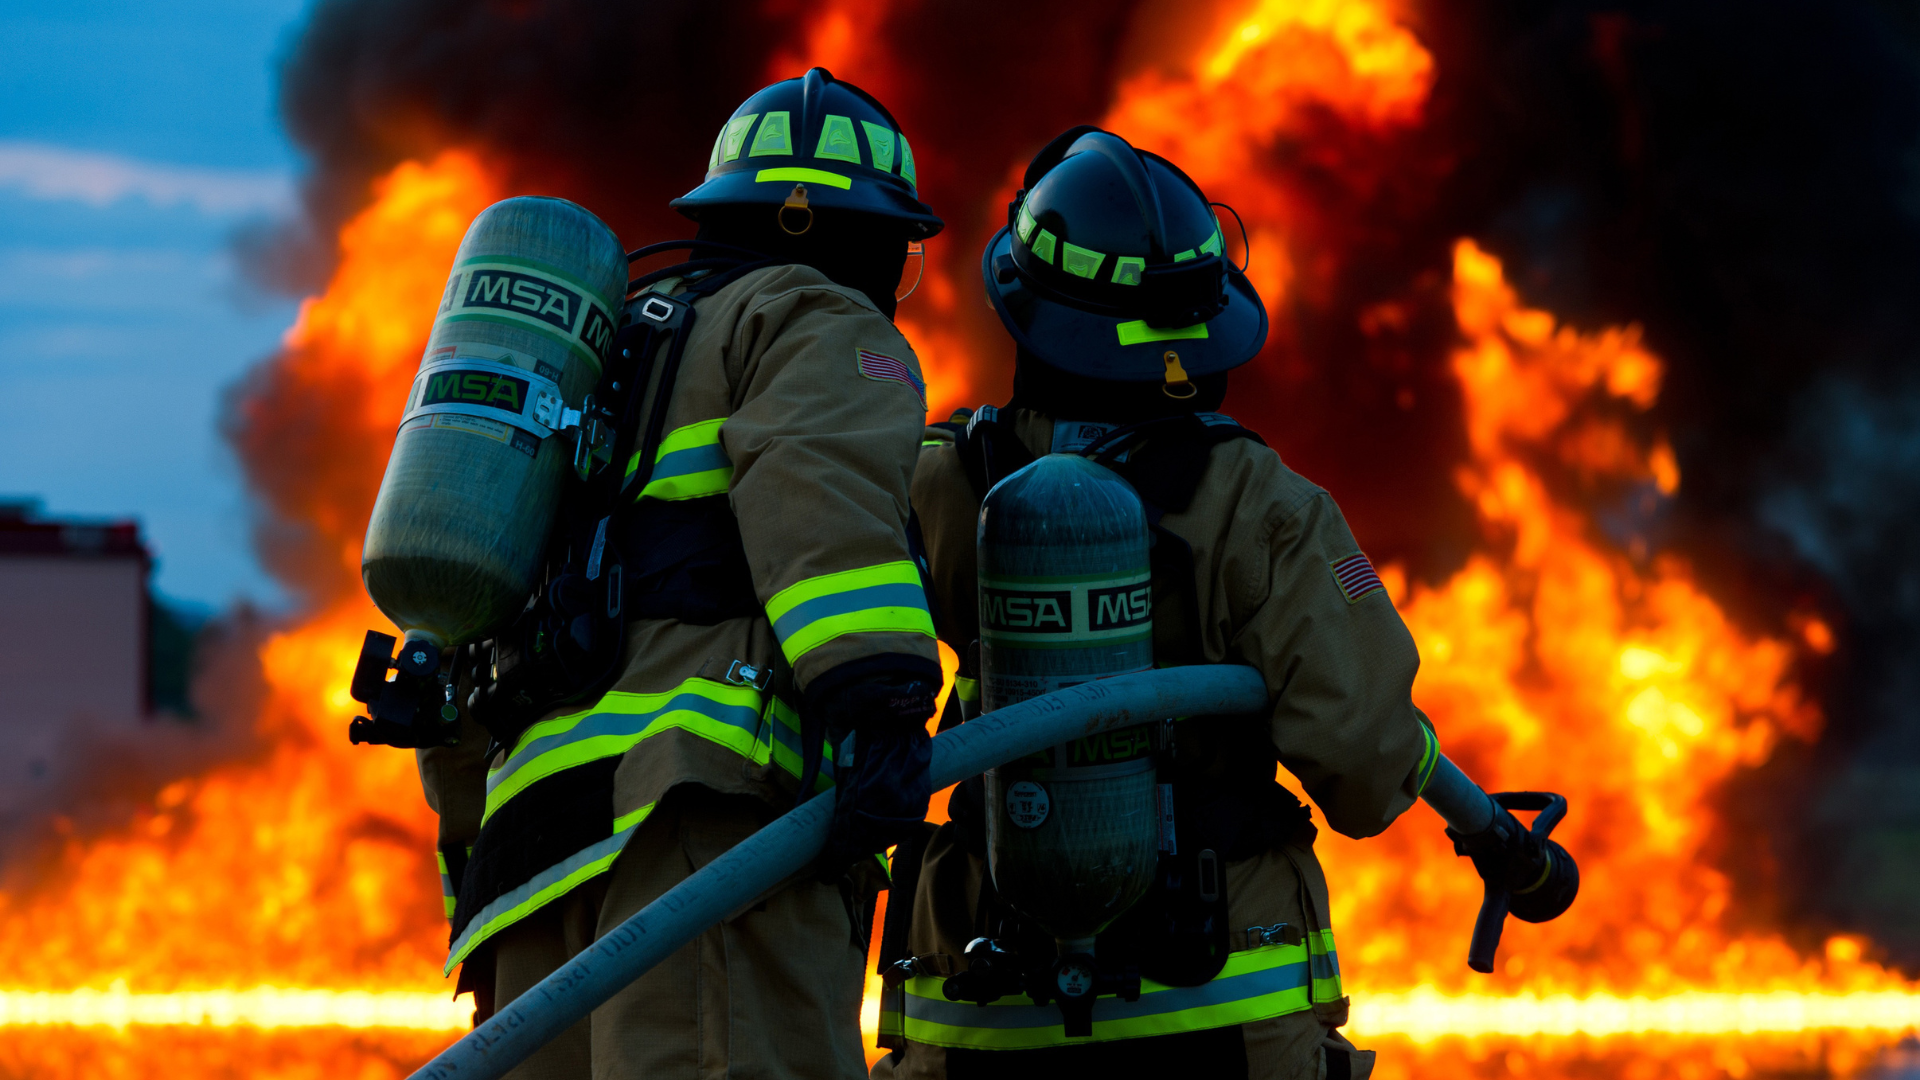 fire fighting systems